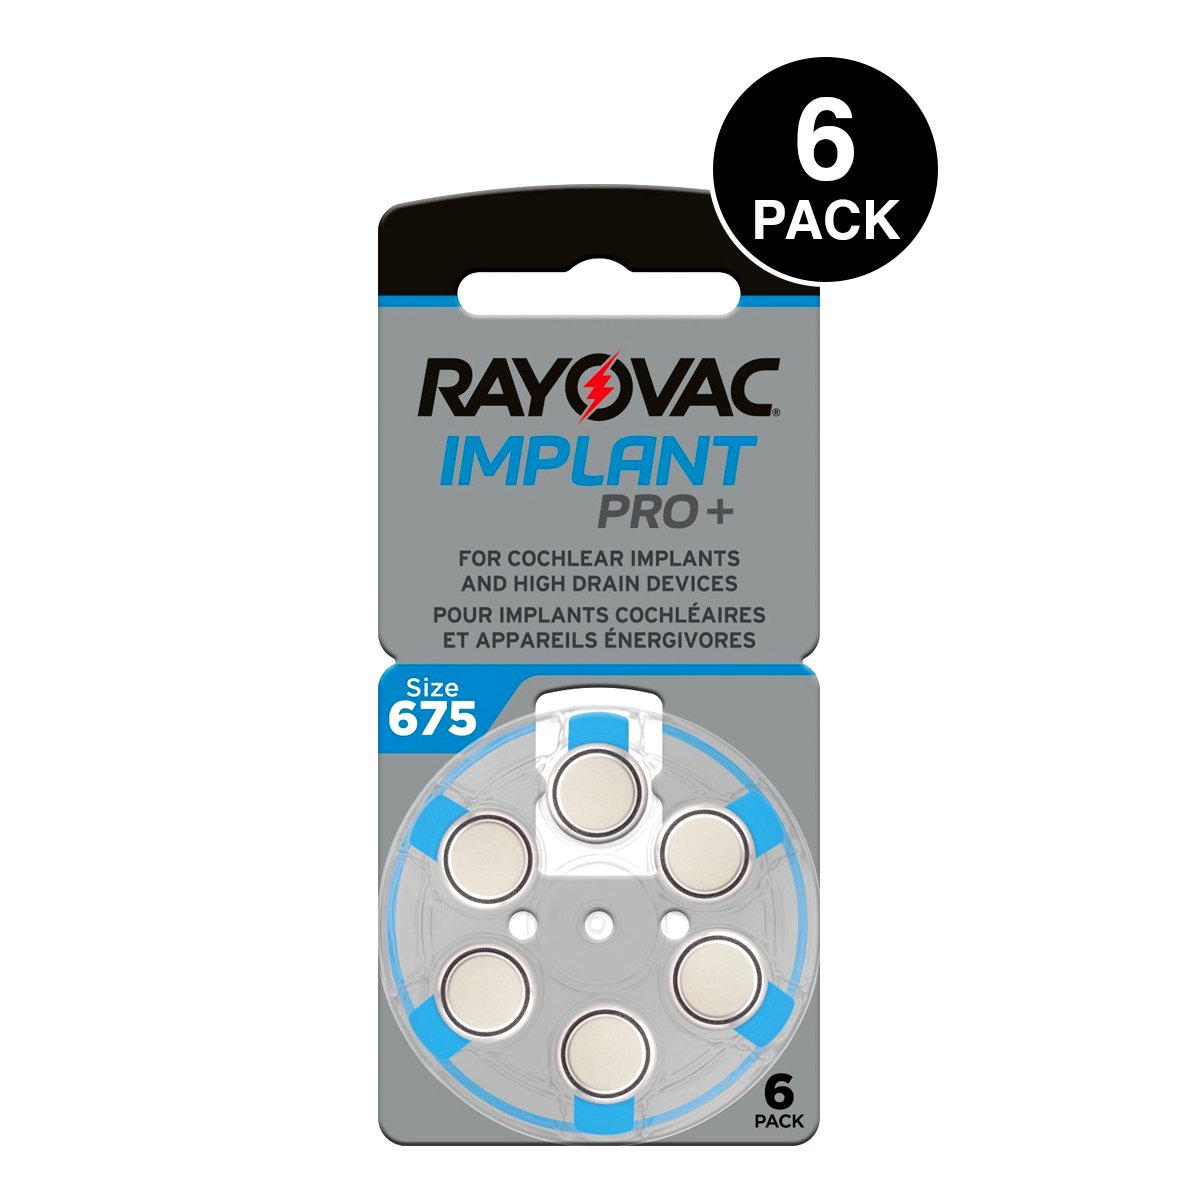 Rayovac Implant Pro, 675P Cochlear Implant Batteries (6 Pcs)